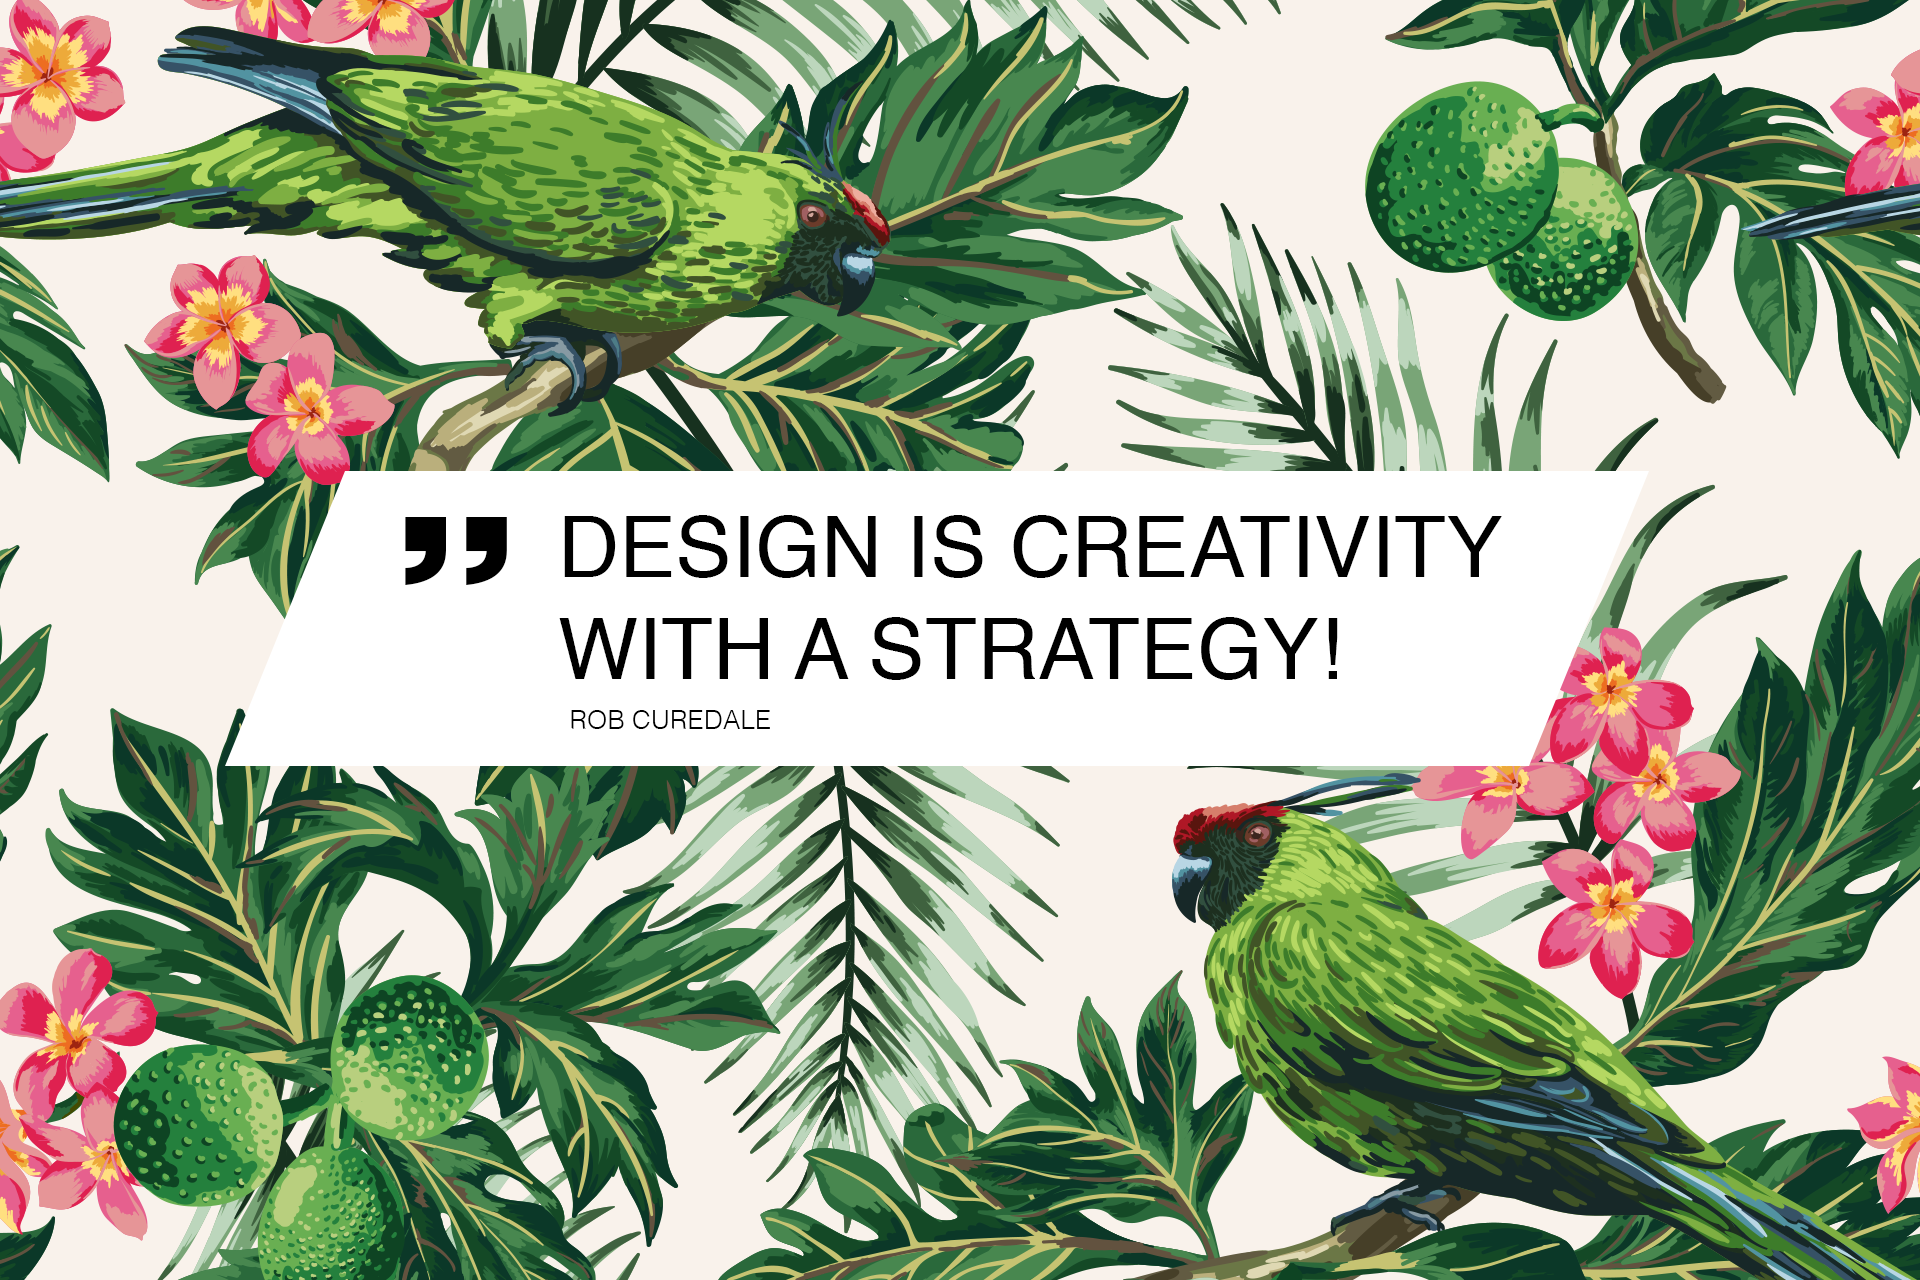 Design is creativity with a strategy. Quote Rob Curedale